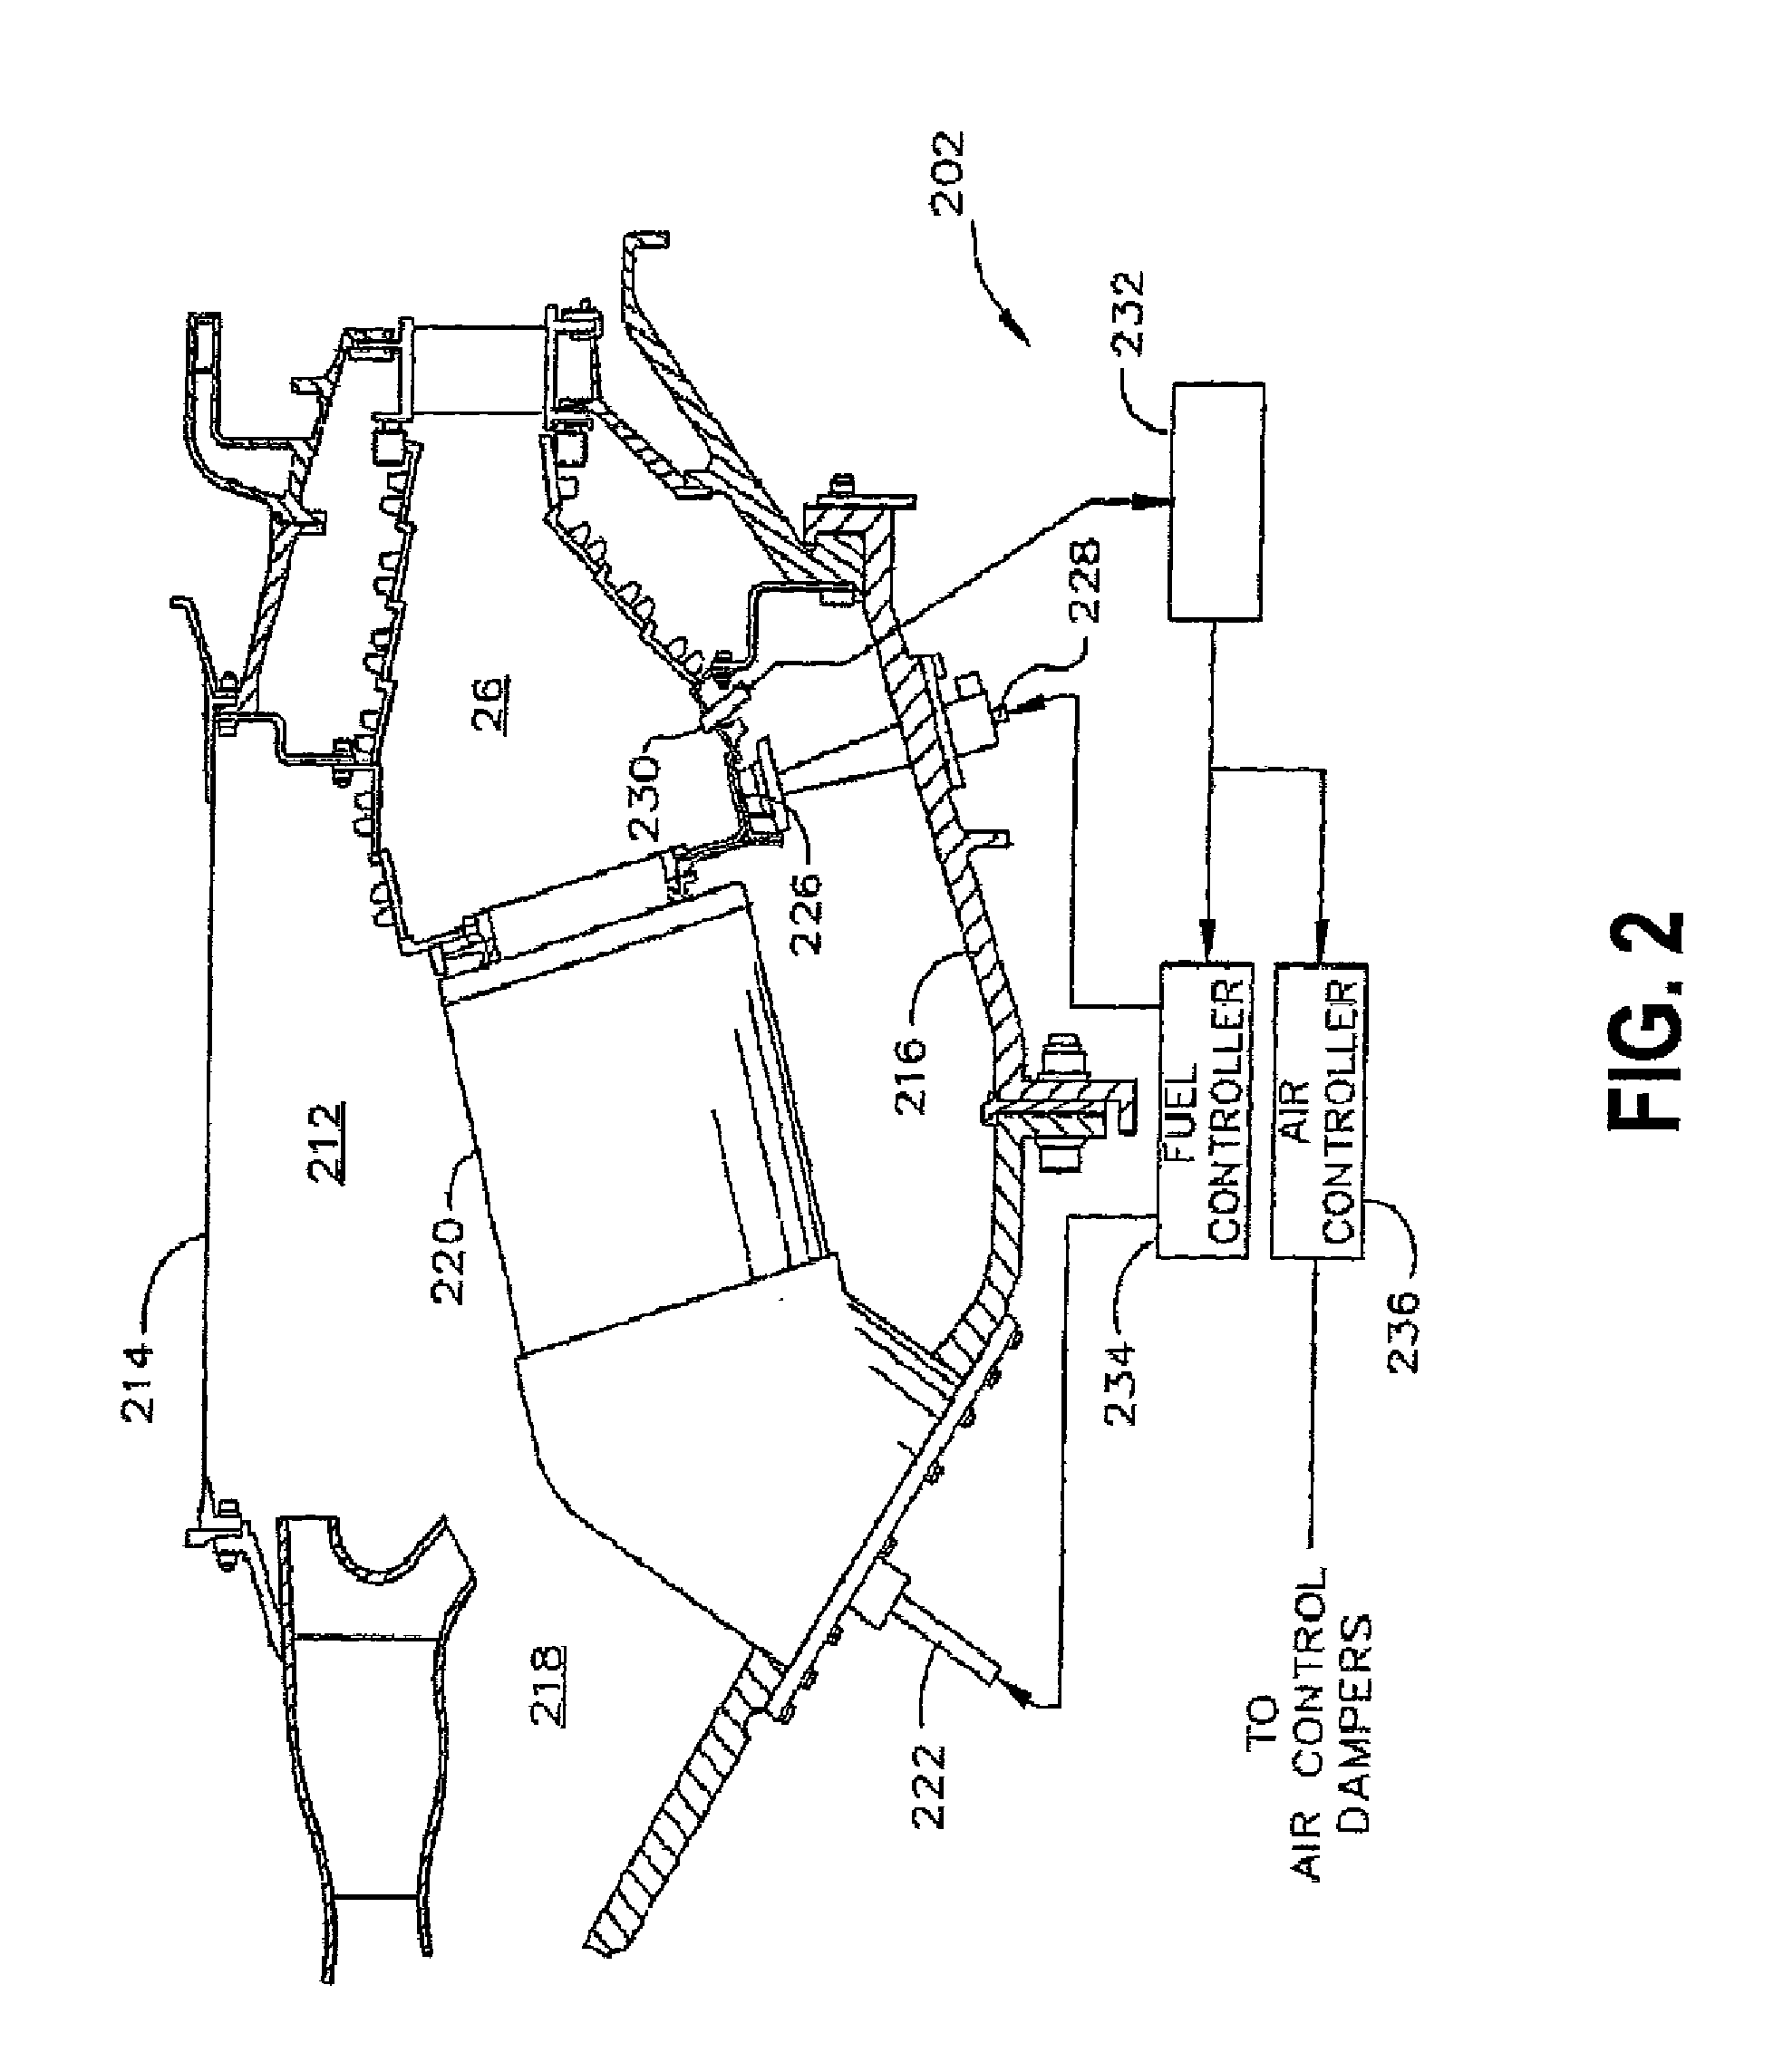 Resonator assembly for mitigating dynamics in gas turbines